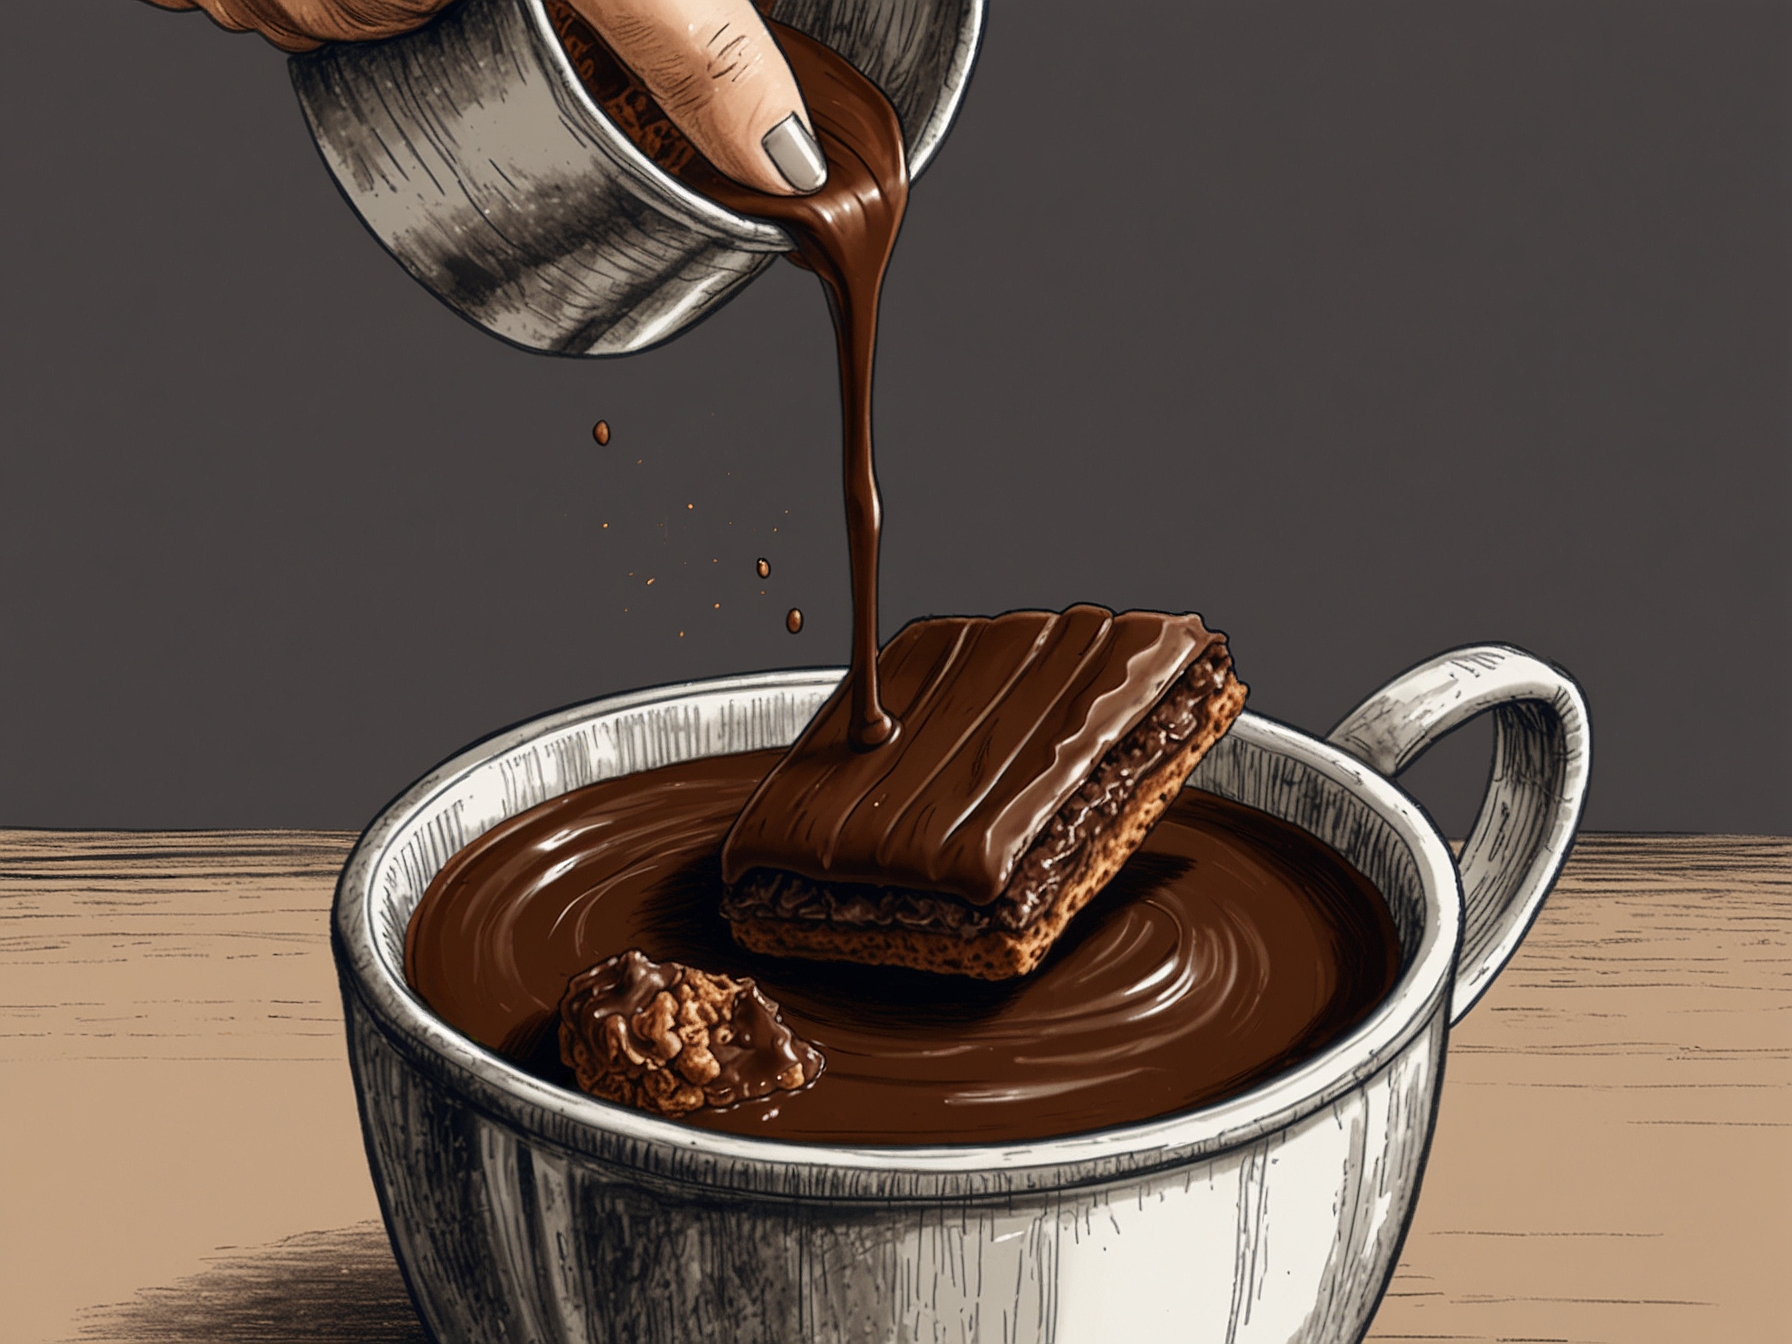 Close-up of supermarket own-label luxury chocolate biscuits being dunked into a cup of coffee, highlighting their durability and rich chocolate coating.